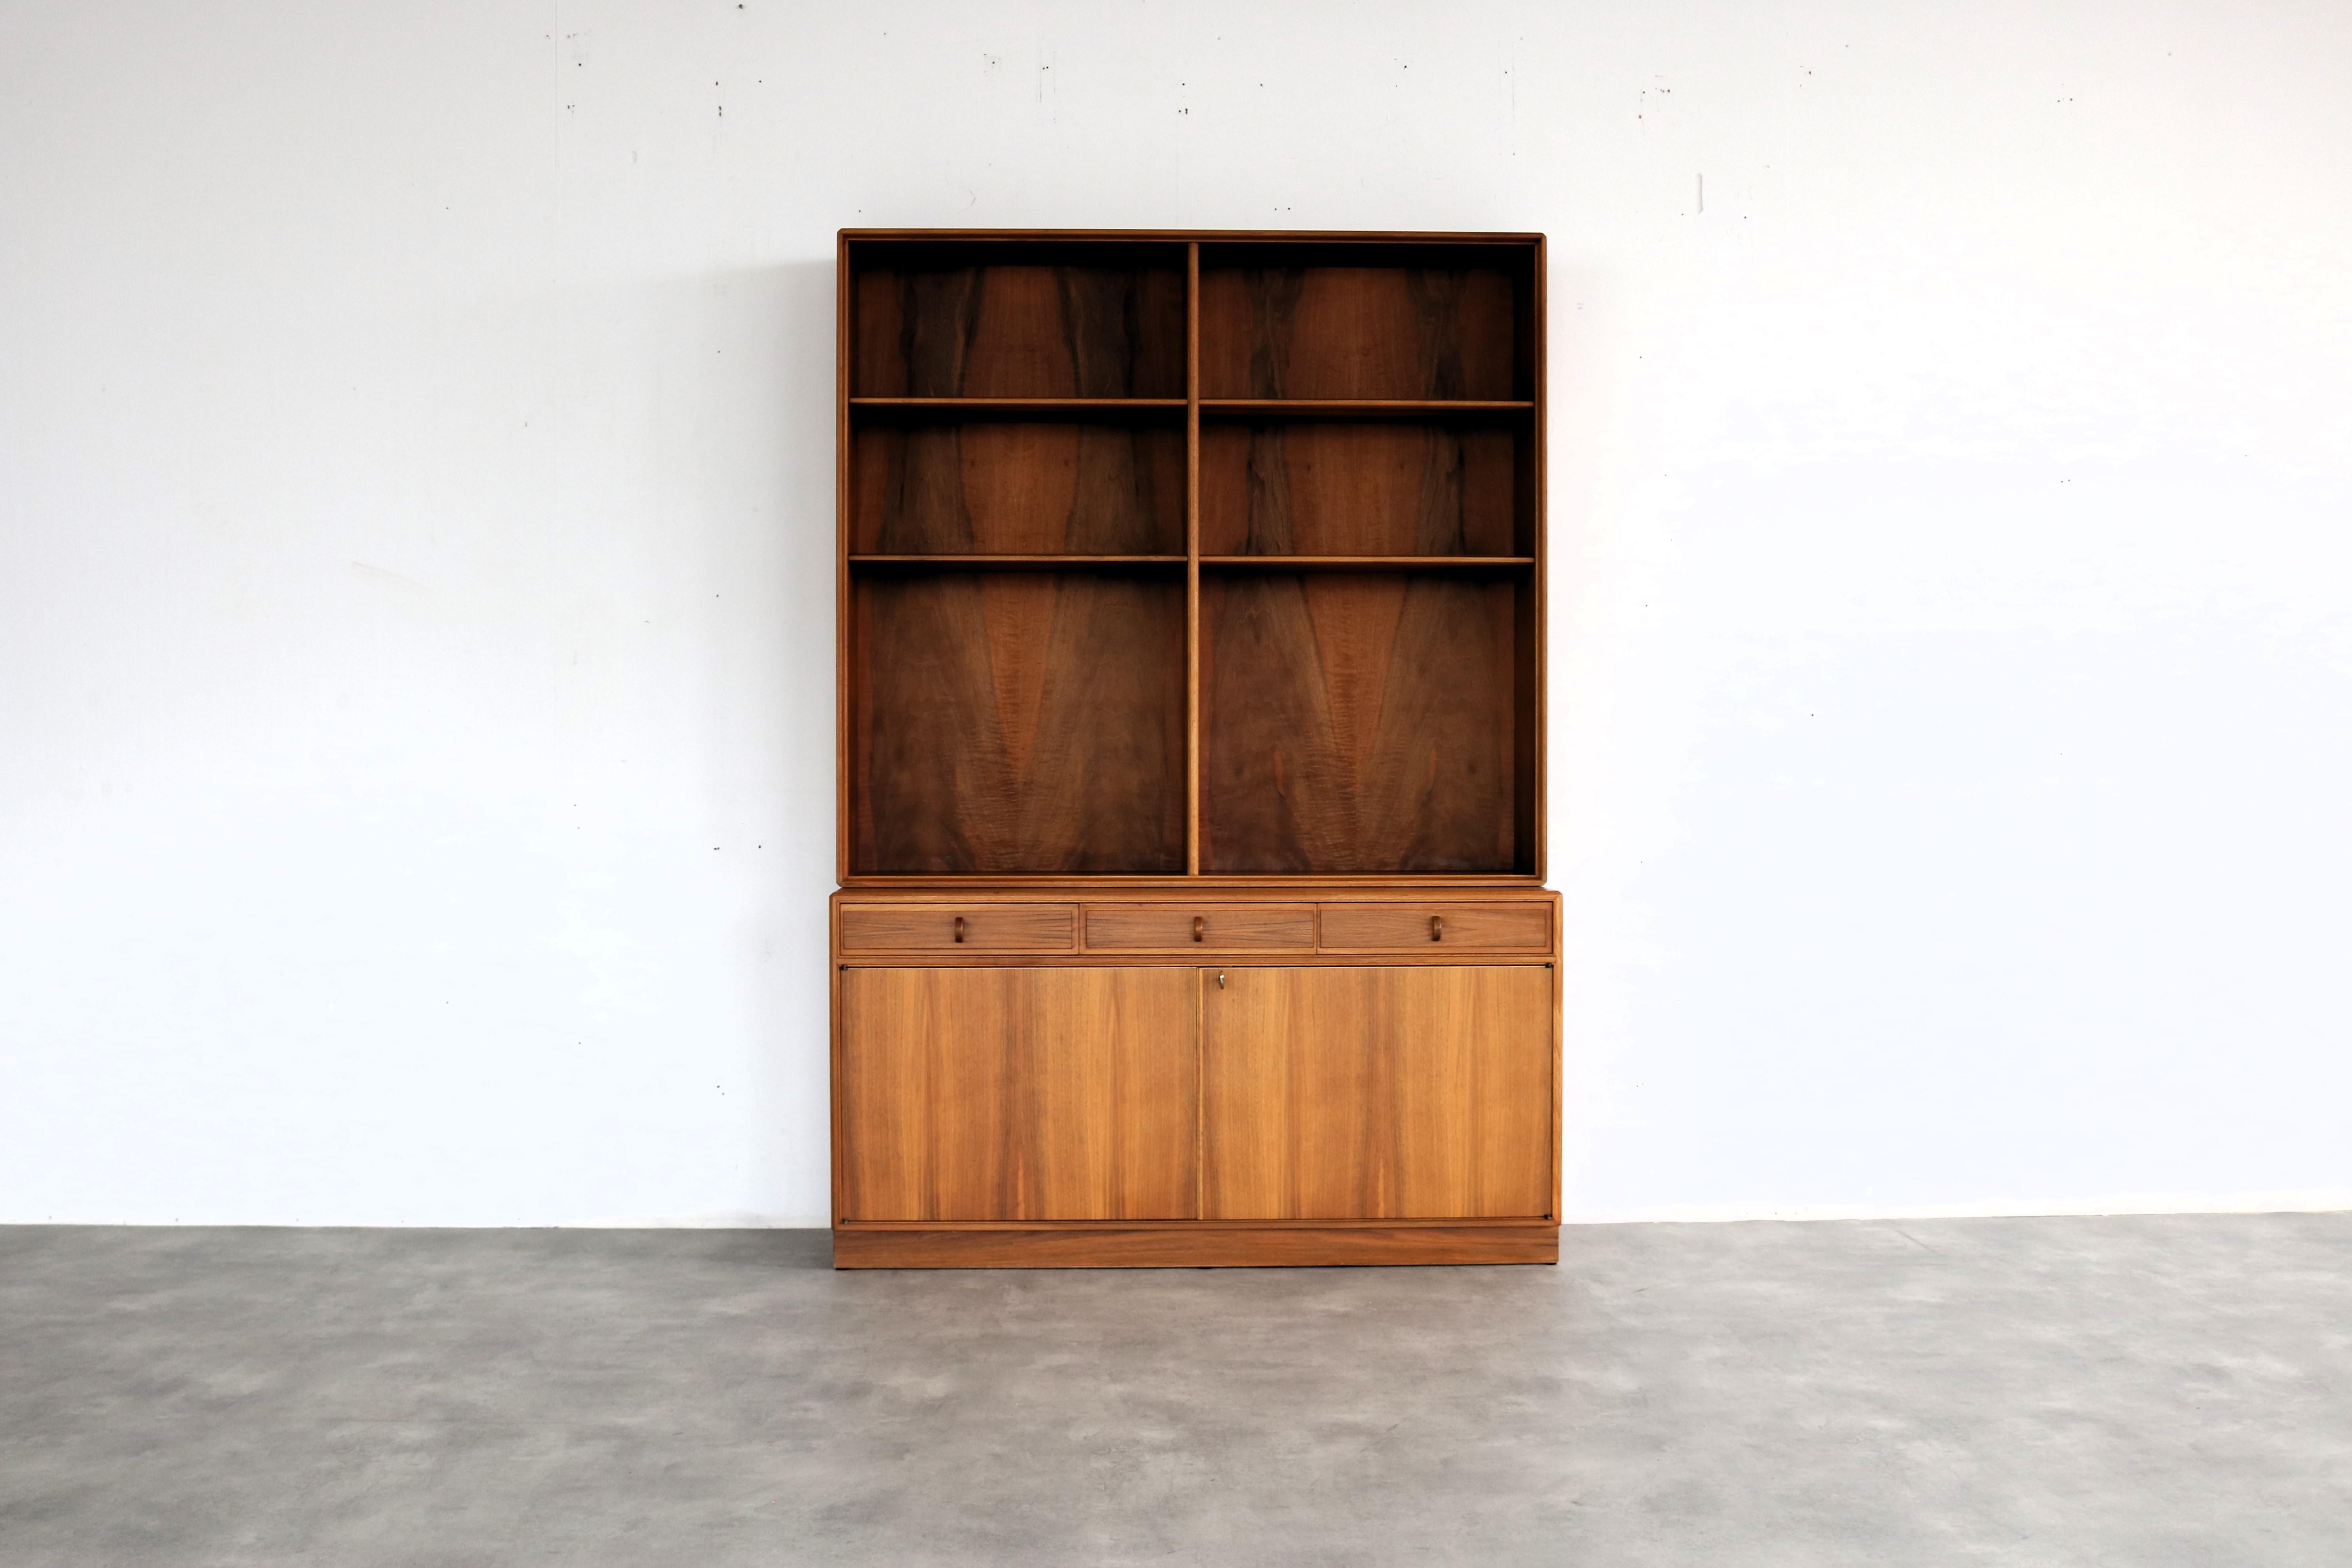 vintage bookcase | wall cupboard | 60s | Bodafors

period | 60's
design | Bodafors | Sweden
condition | good | light signs of use
size | 188 x 130 x 40 (hxwxd)

details | teak;

article number | 2130